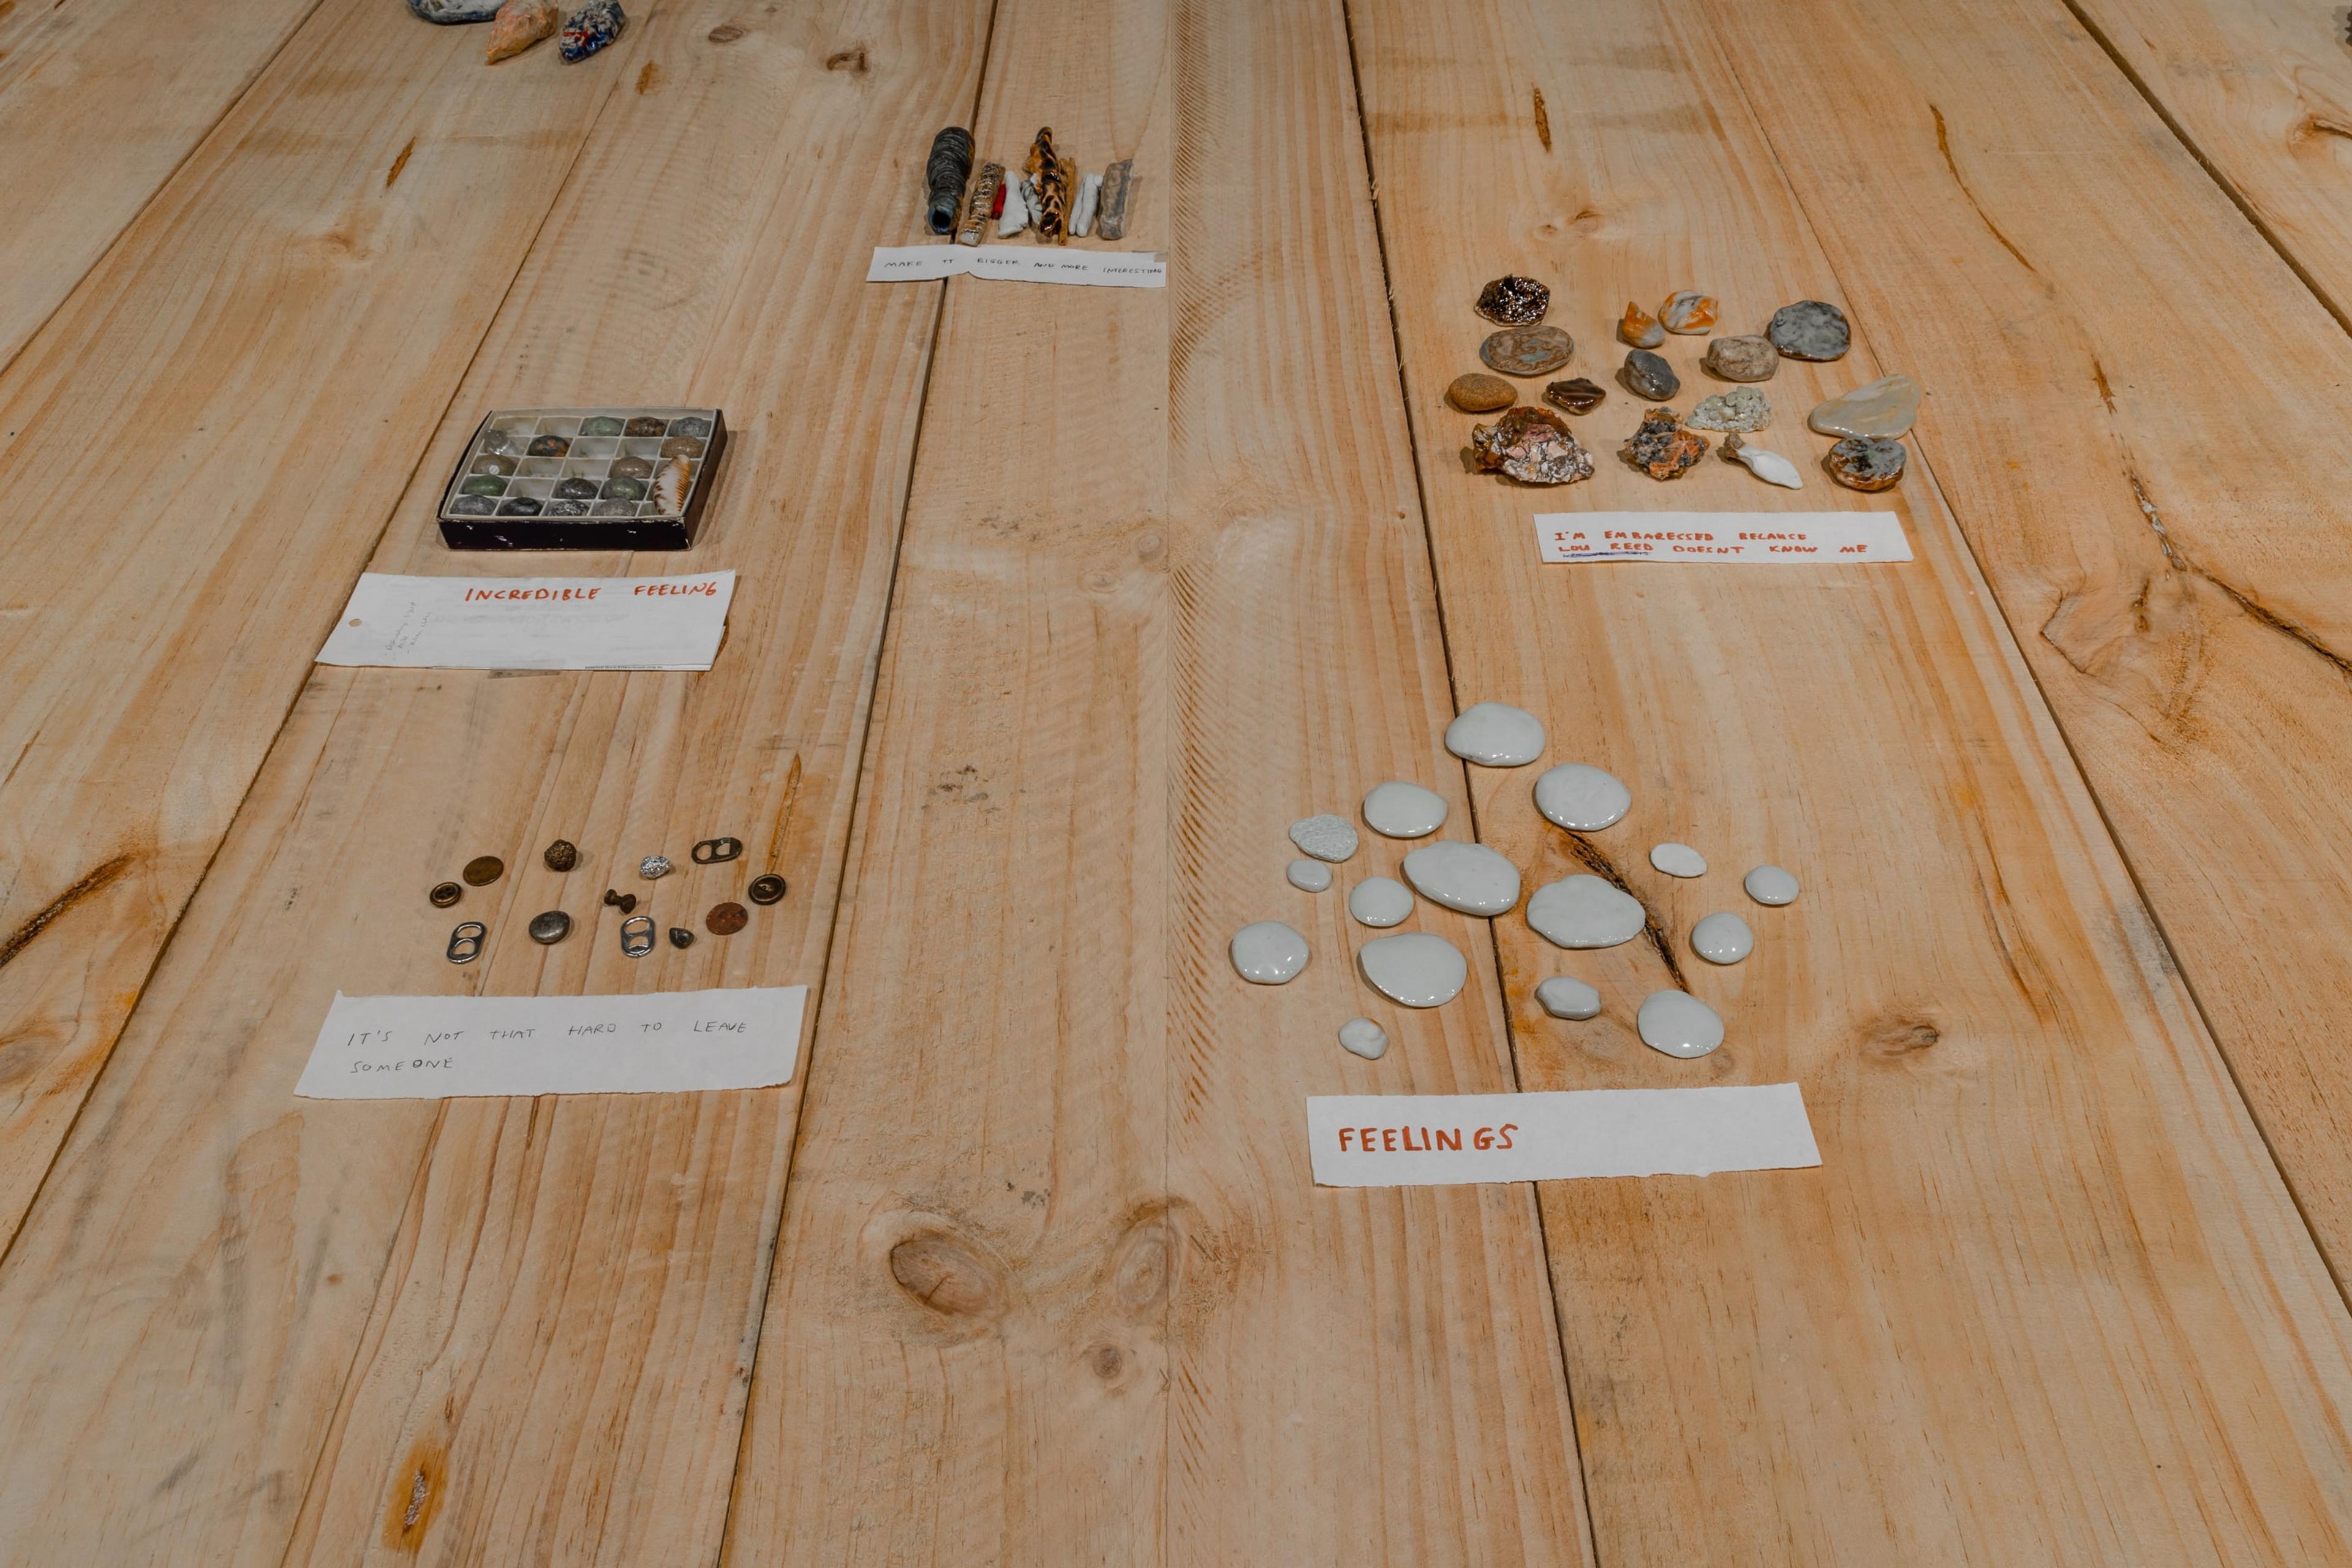 A wooden floor in a dimly lit gallery, covered with groups of small objects with written paper labels in red ink